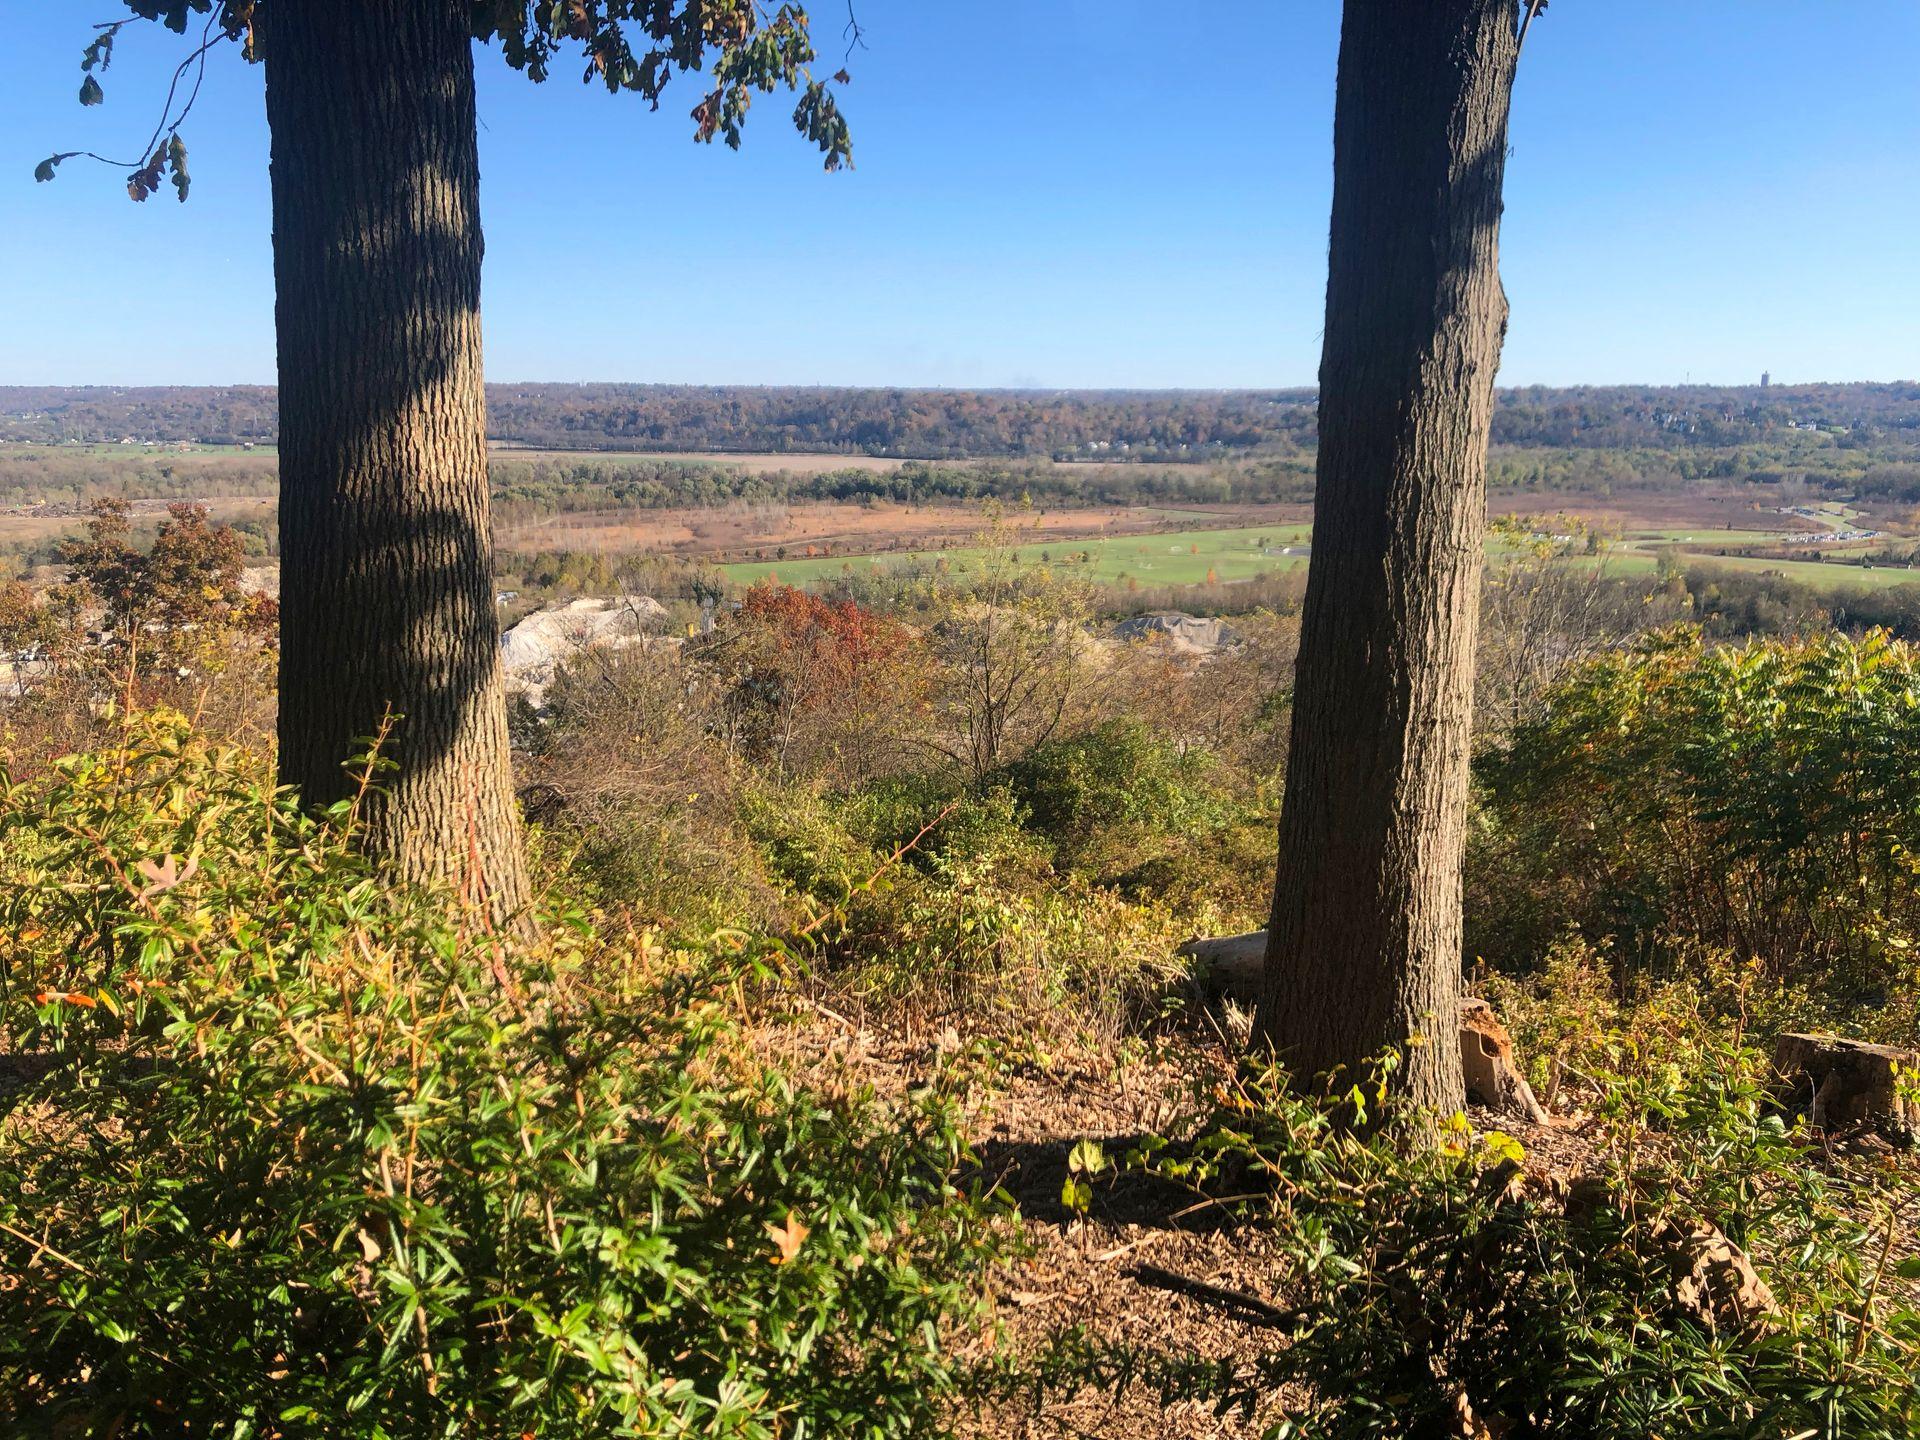 A photo of an overlook at Ault Park. There are two trees and Lunken airport in the background.